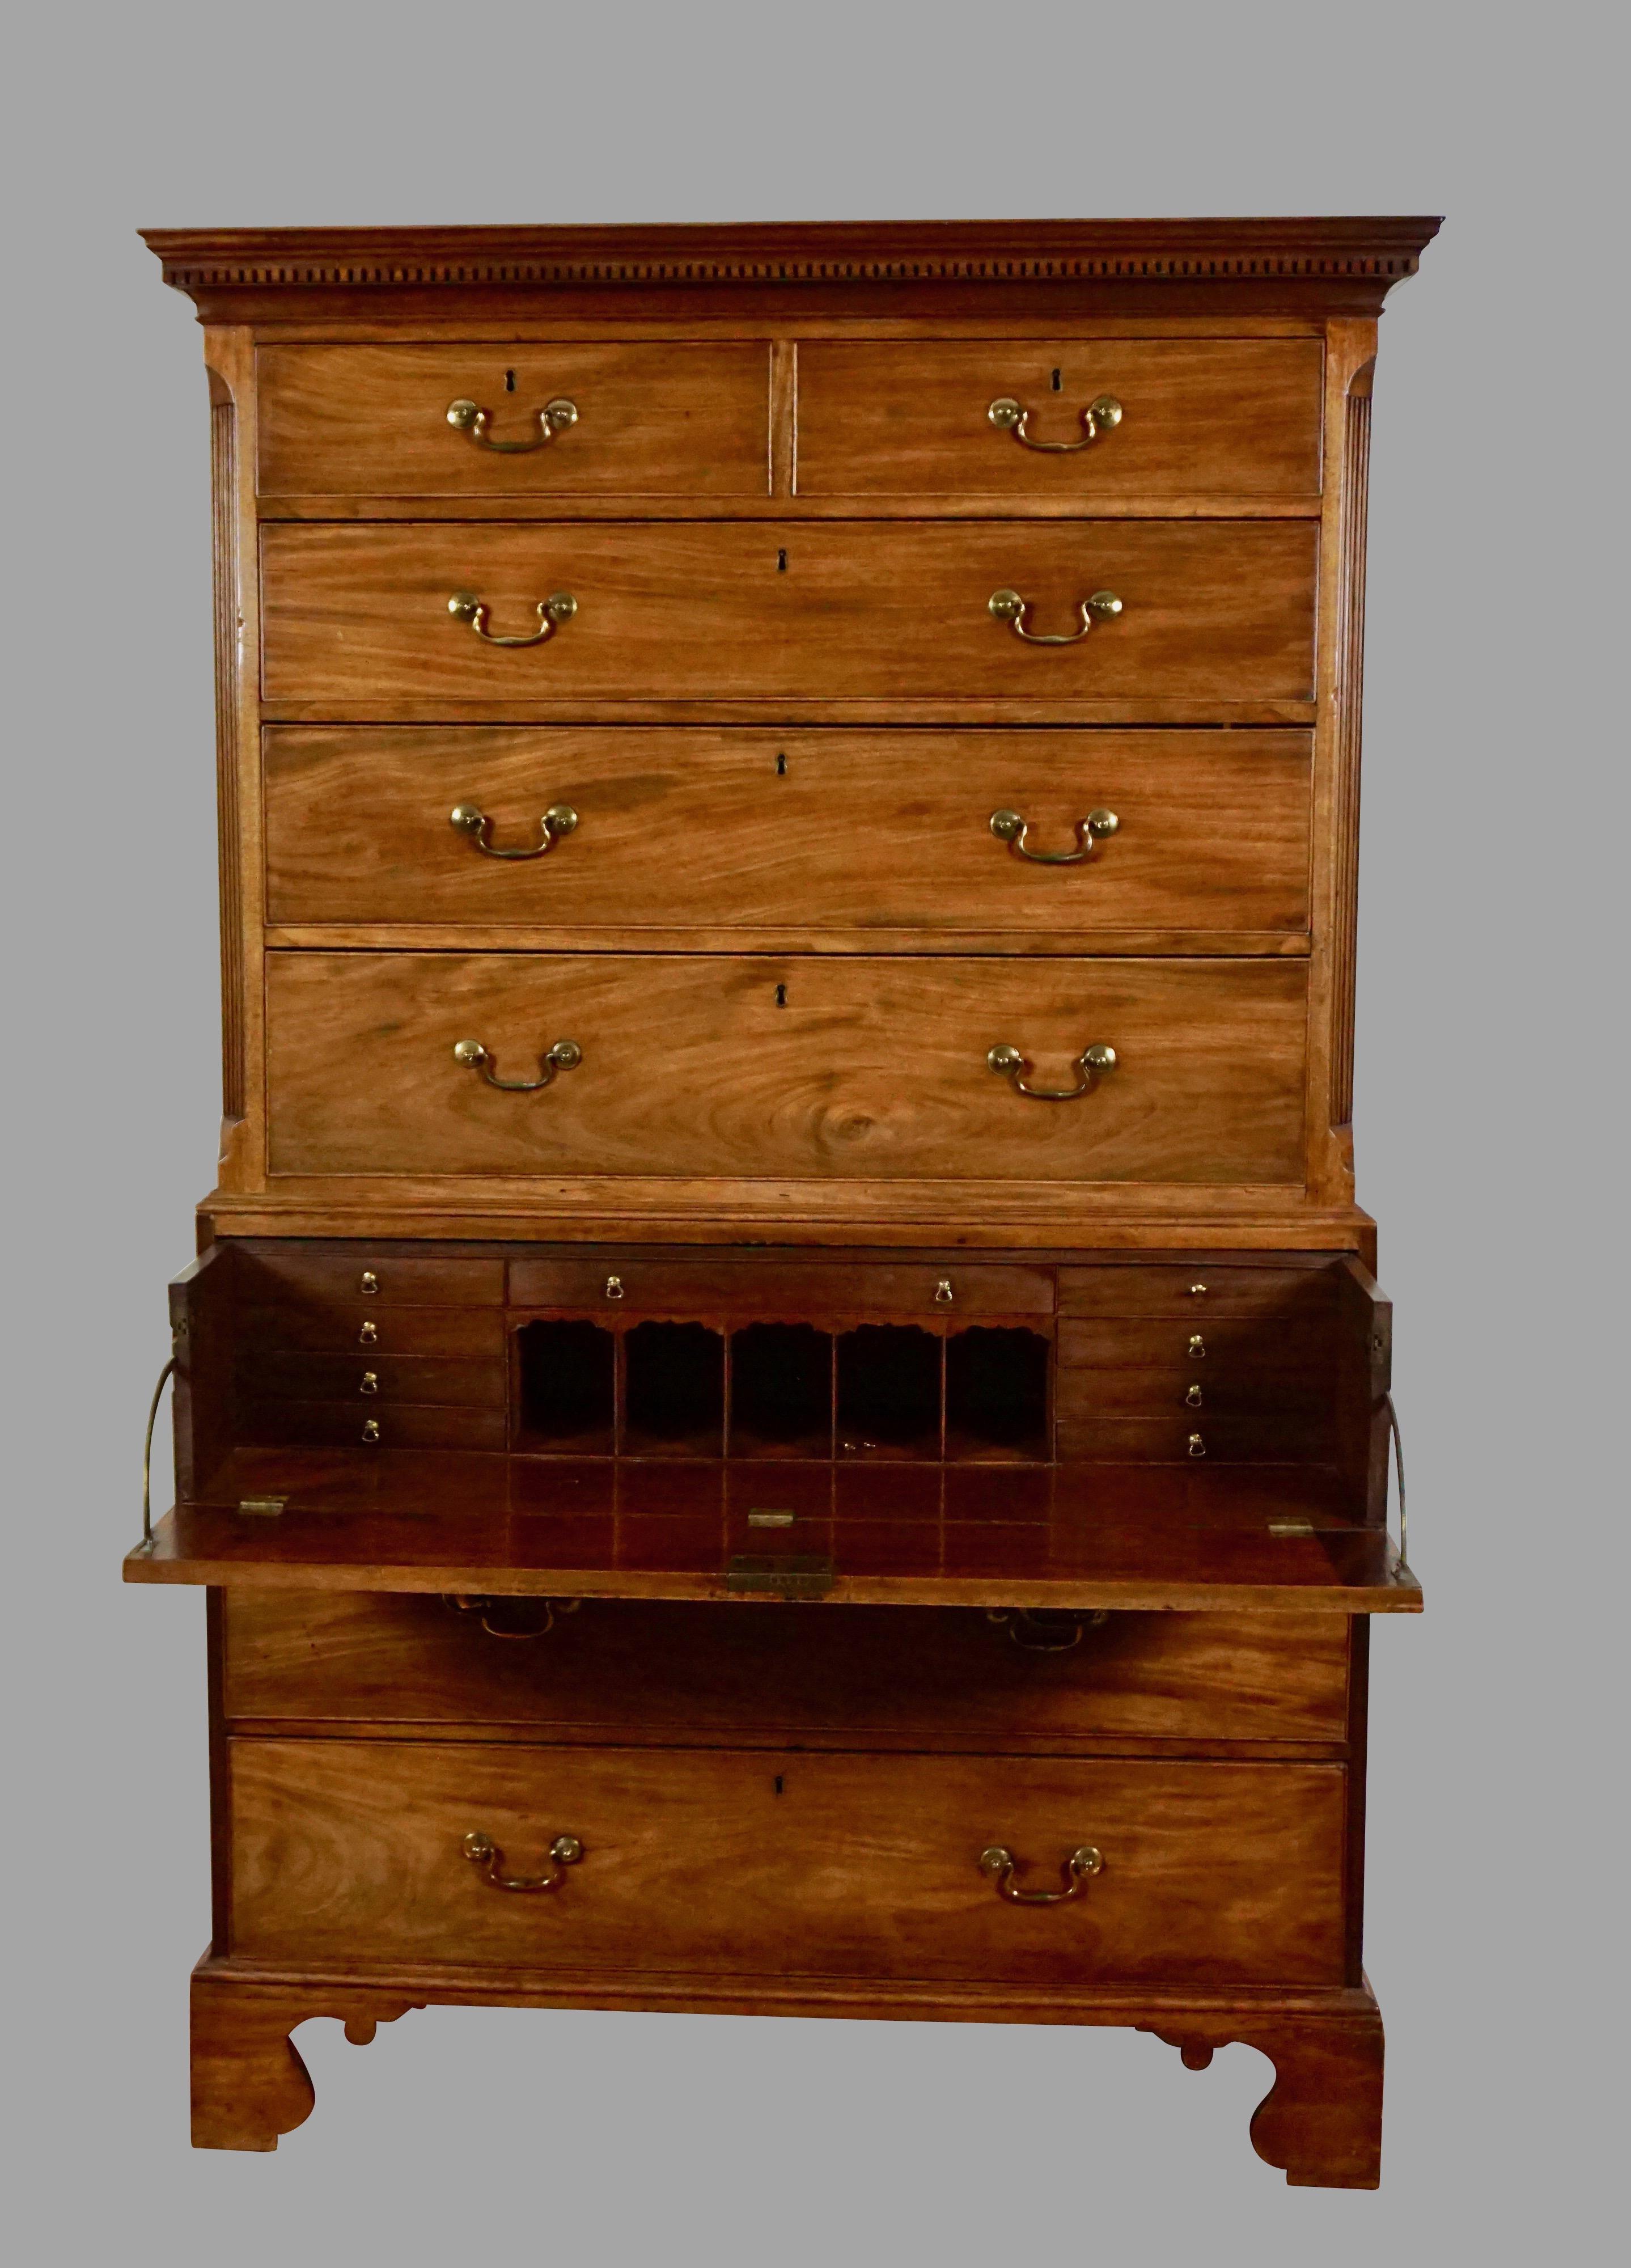 A good quality George III period mahogany chest-on-chest with secretaire, the upper stage with a dentil molded cornice over 2 short and 3 long drawers framed by reeded quarter columns. The lower stage has a well-fitted secretaire top drawer above 2